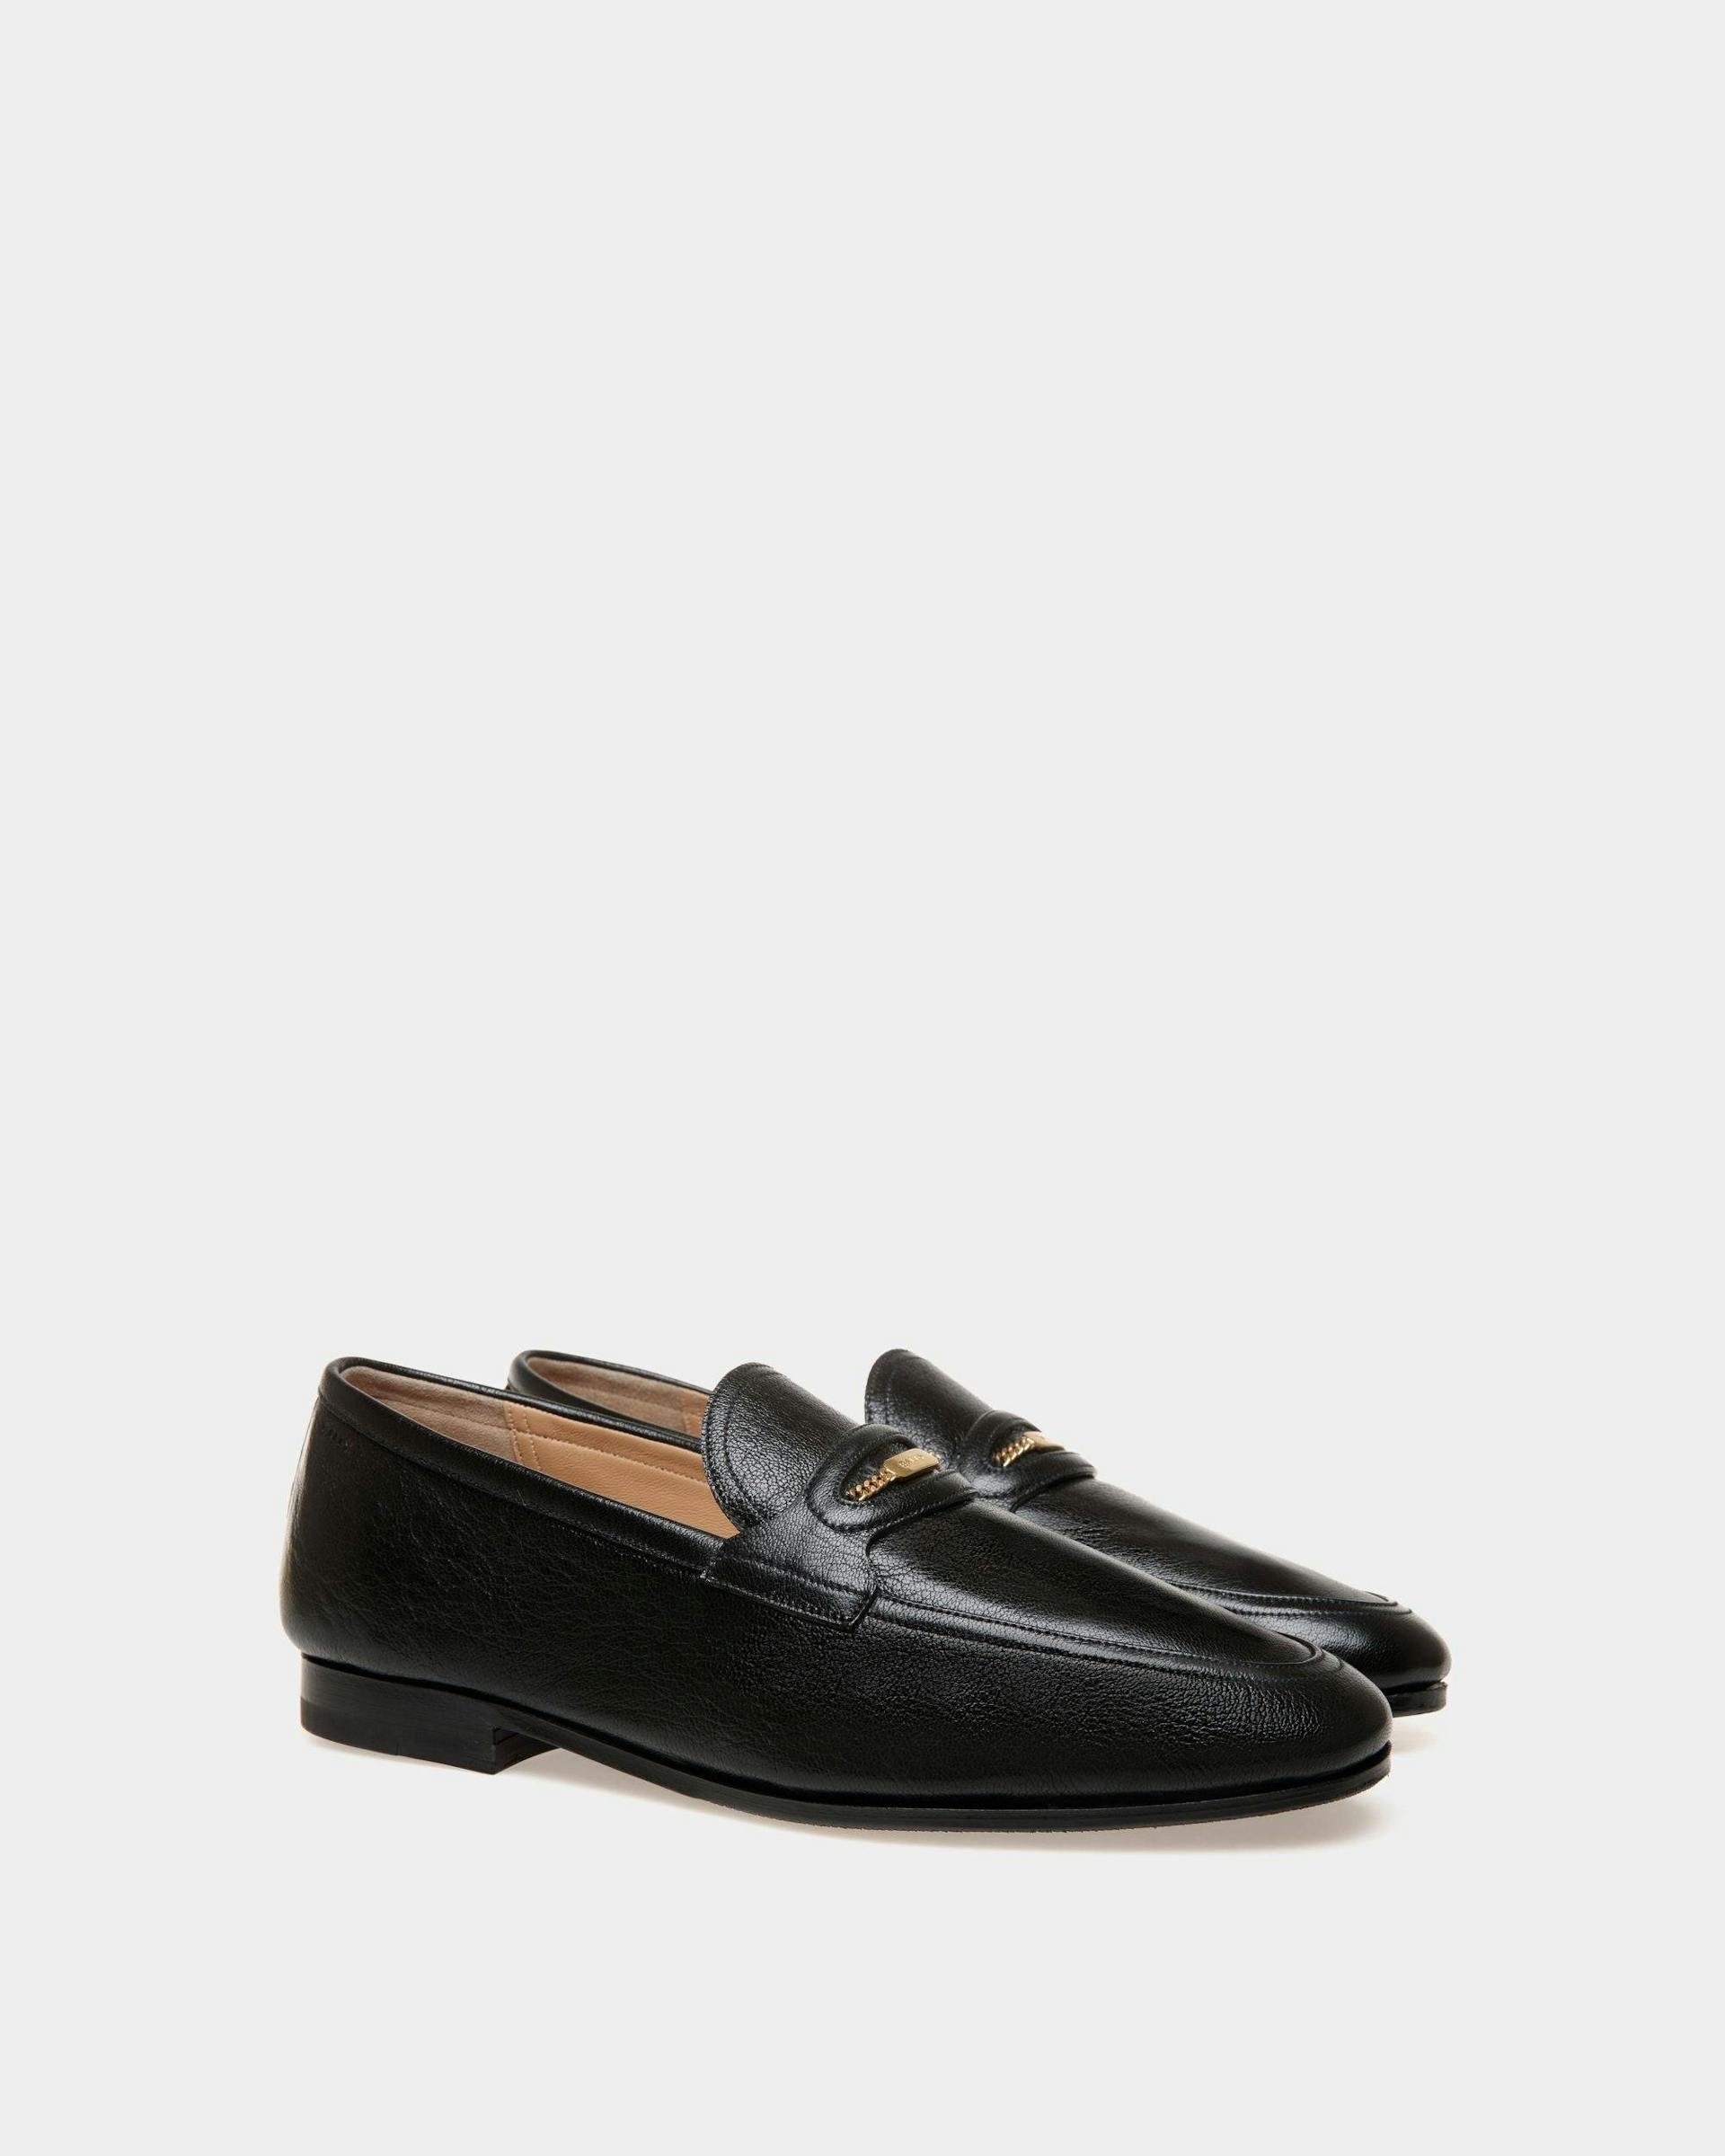 Men's Plume Loafer in Black Grained Leather | Bally | Still Life 3/4 Front